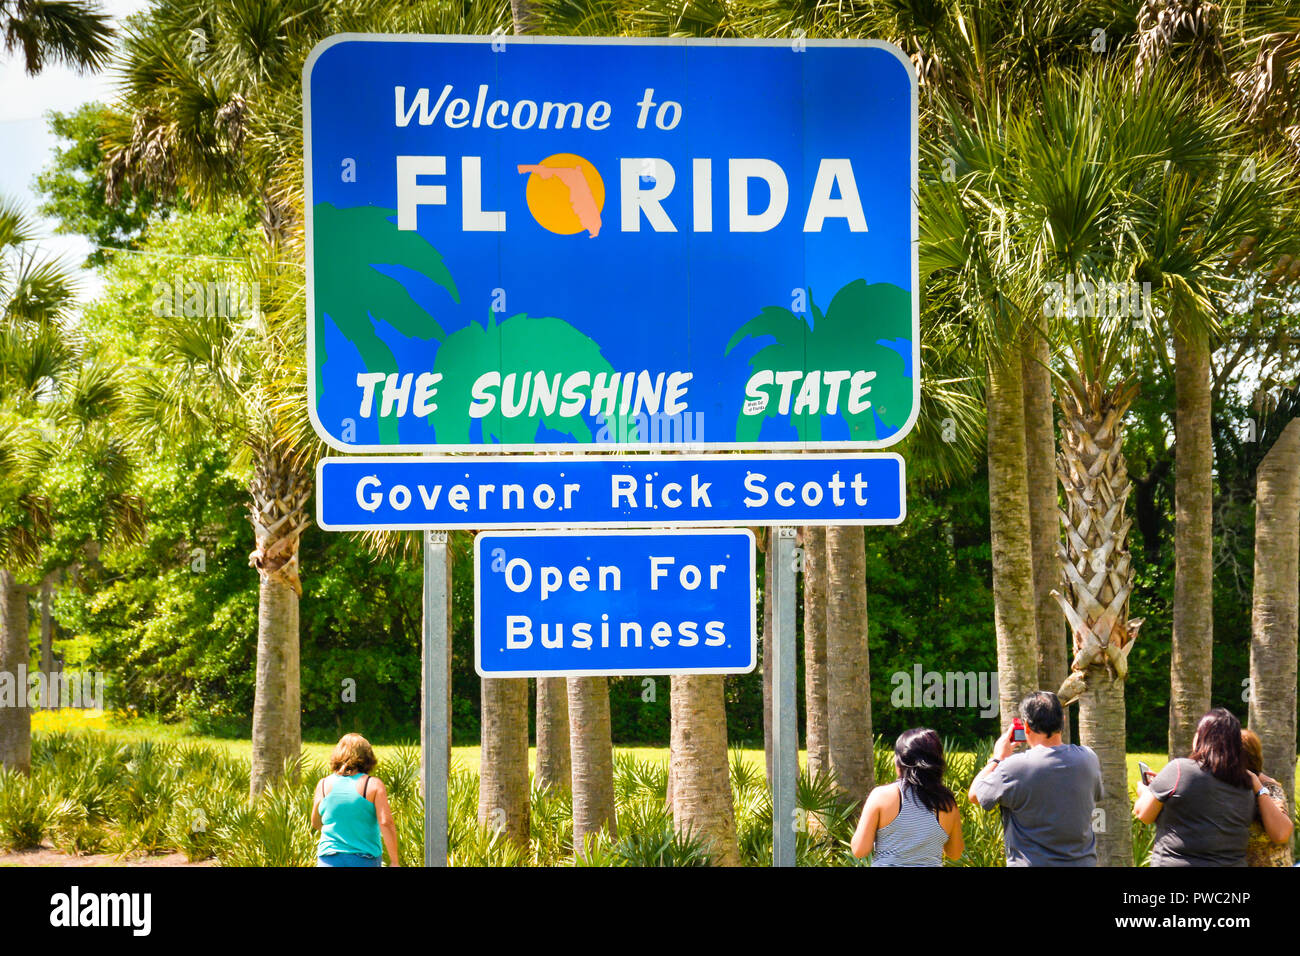 Tourists pull over to take photo with bright blue 'Welcome to Florida' the sunshine state sign at state borderline with Palm trees in Florida Line Stock Photo